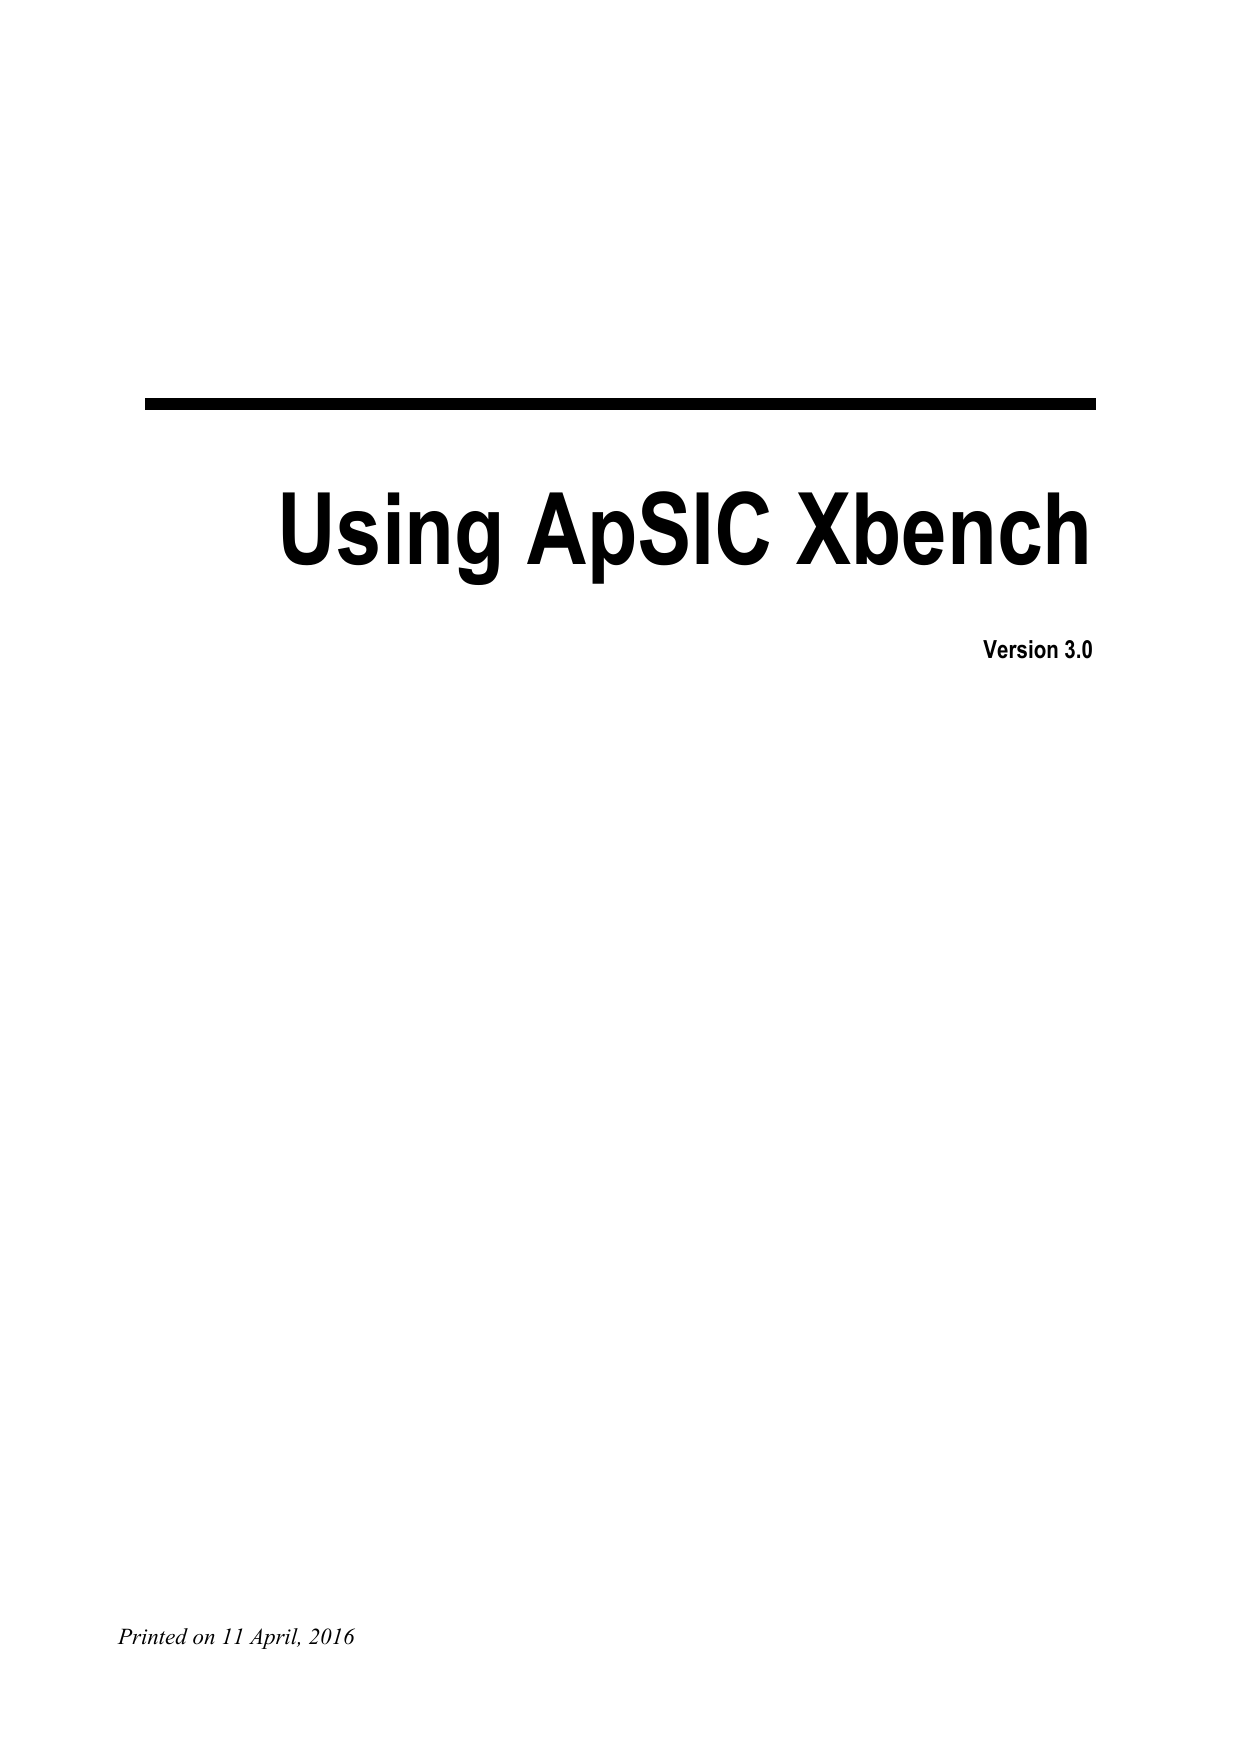 apsic xbench check